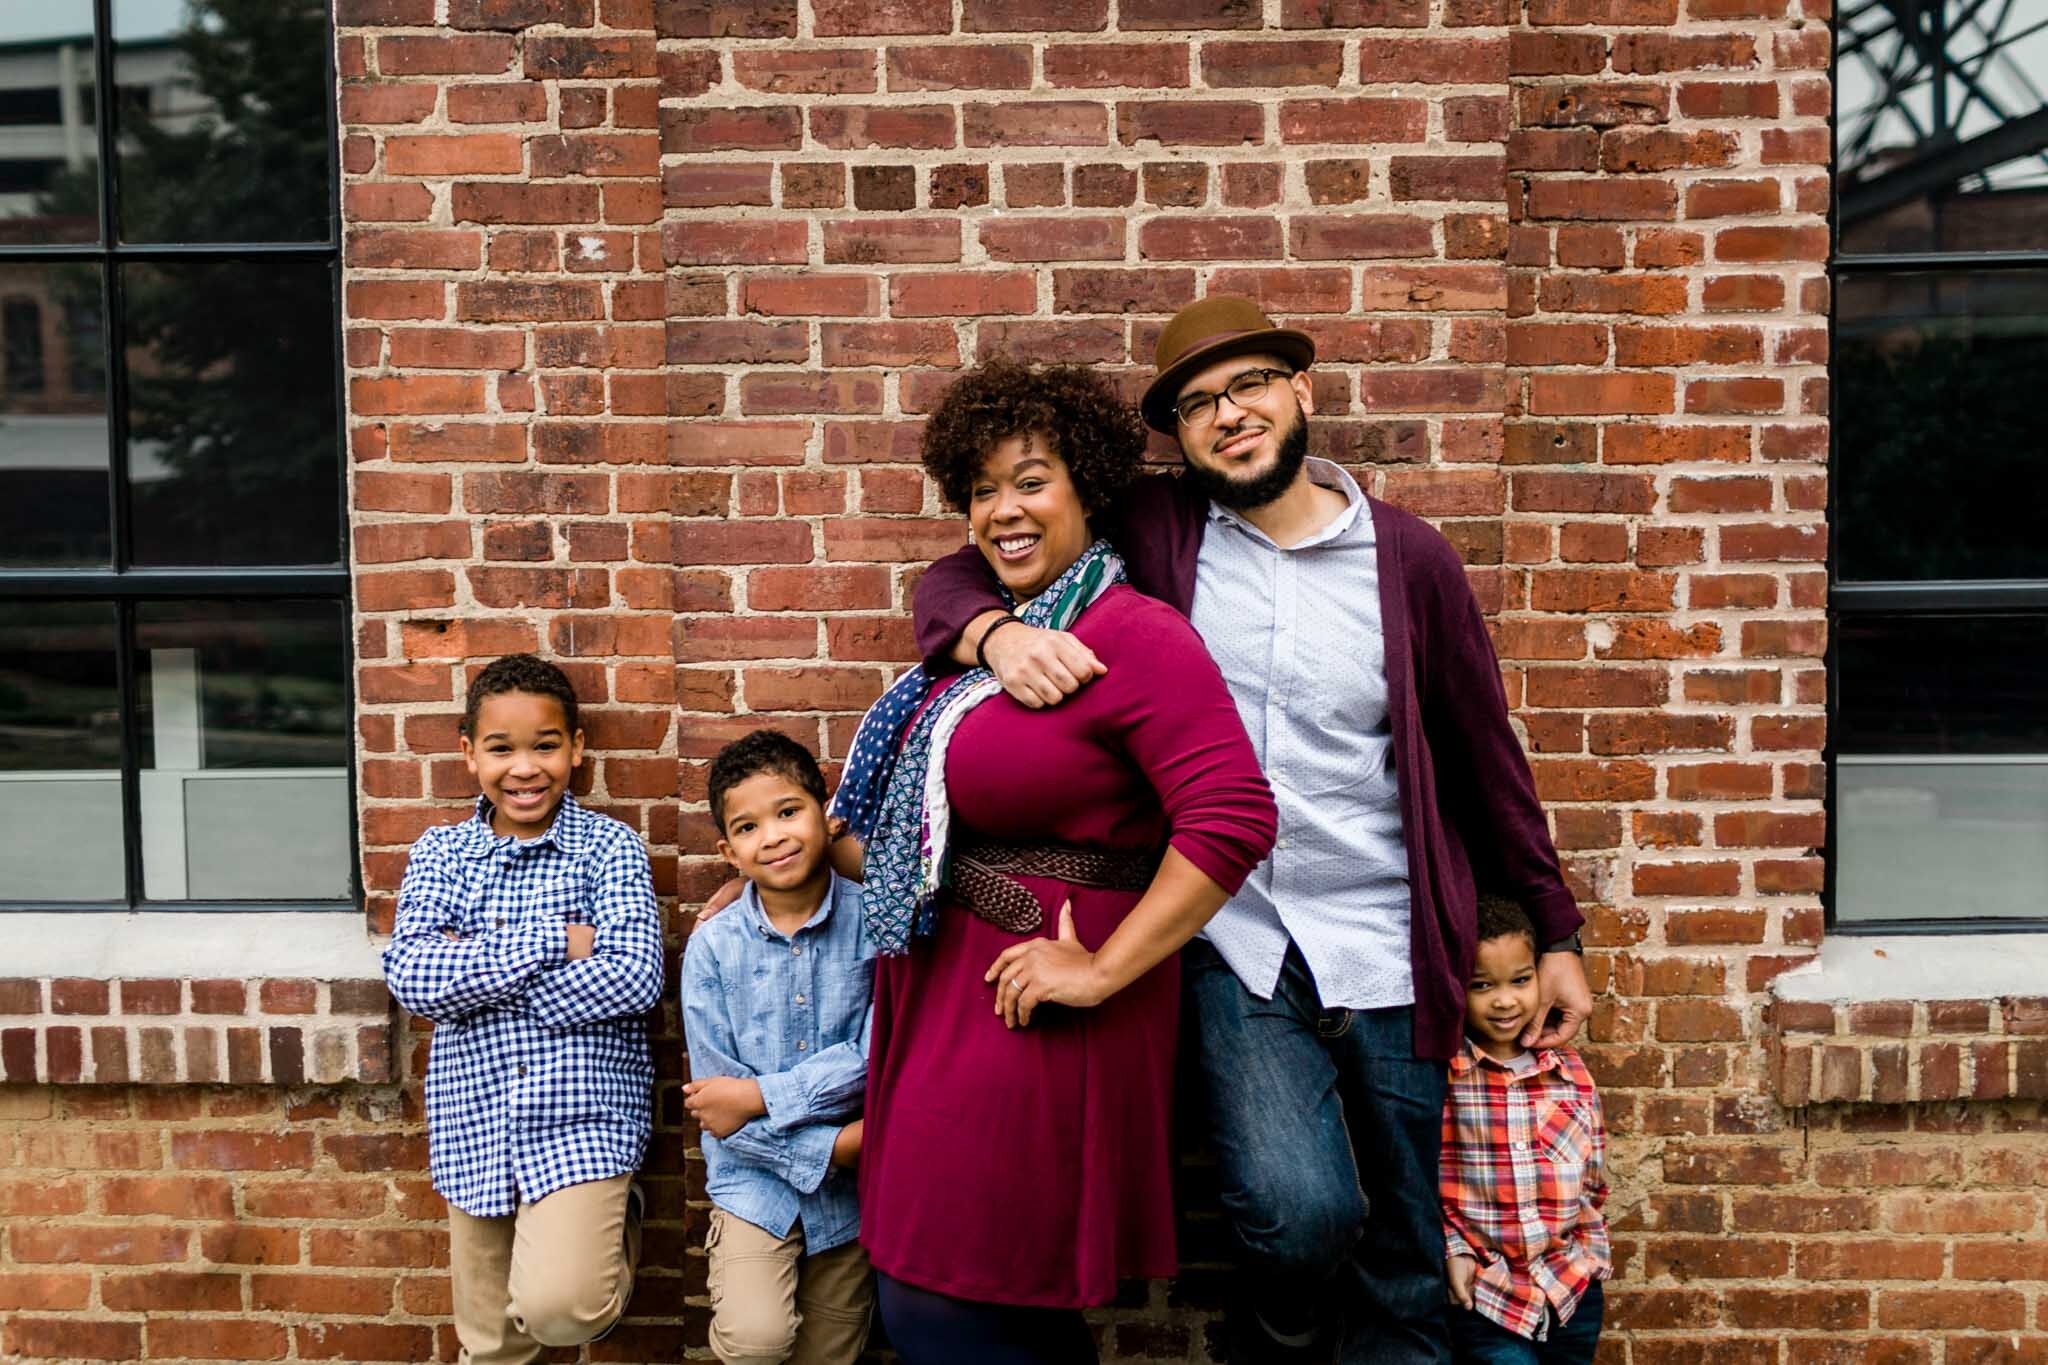 Durham Family Photographer | By G. Lin Photography | Family posing against brick wall at American Tobacco Campus